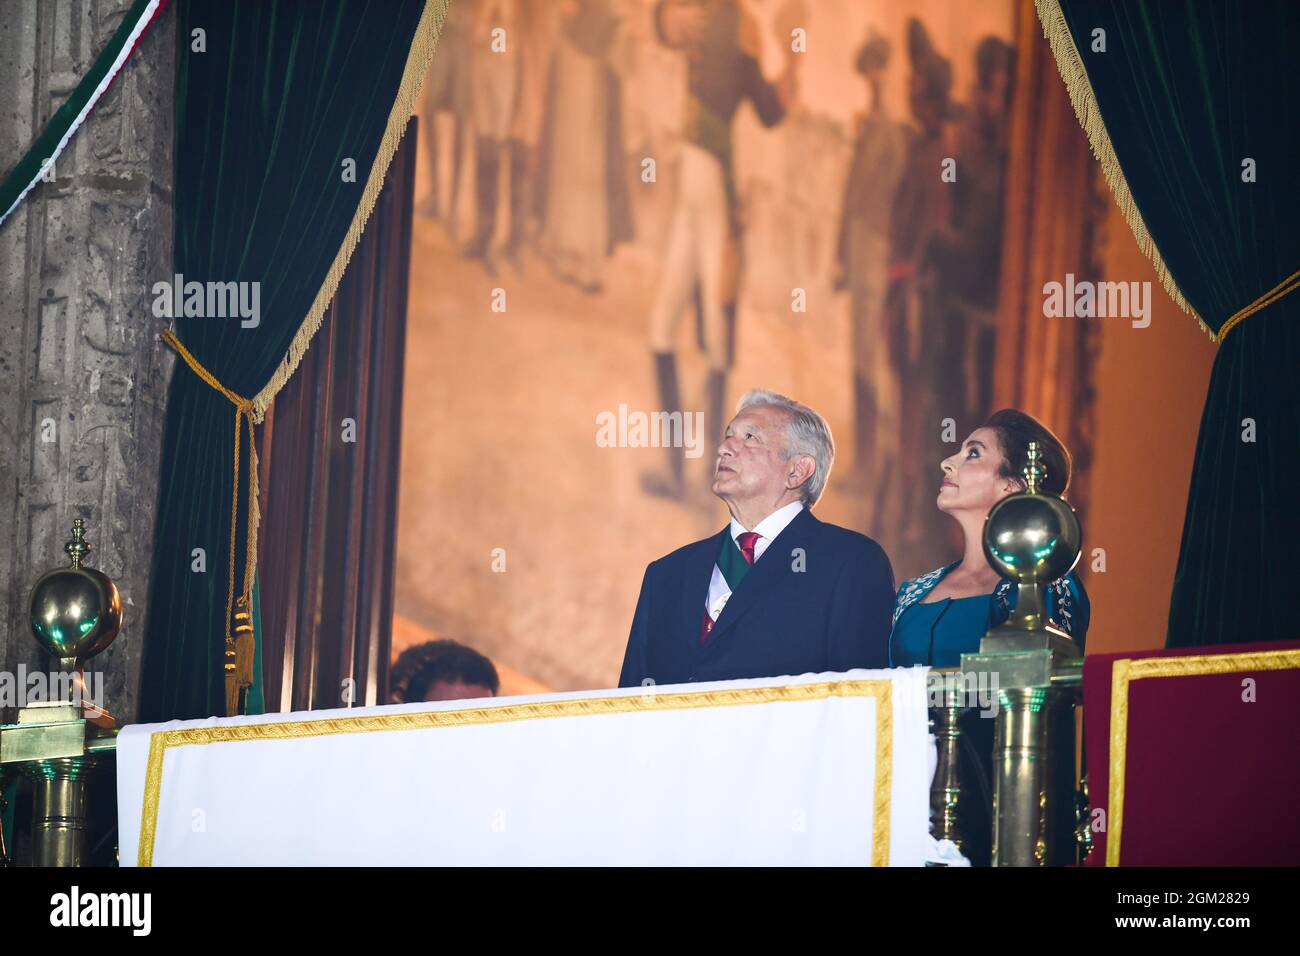 (210916) -- MEXICO CITY, Sept. 16, 2021 (Xinhua) -- Mexican President Andres Manuel Lopez Obrador (L) and his wife attend the Independence Day celebrations in Mexico City, capital of Mexico, Sept. 15, 2021. (Xinhua/Xin Yuewei) Stock Photo